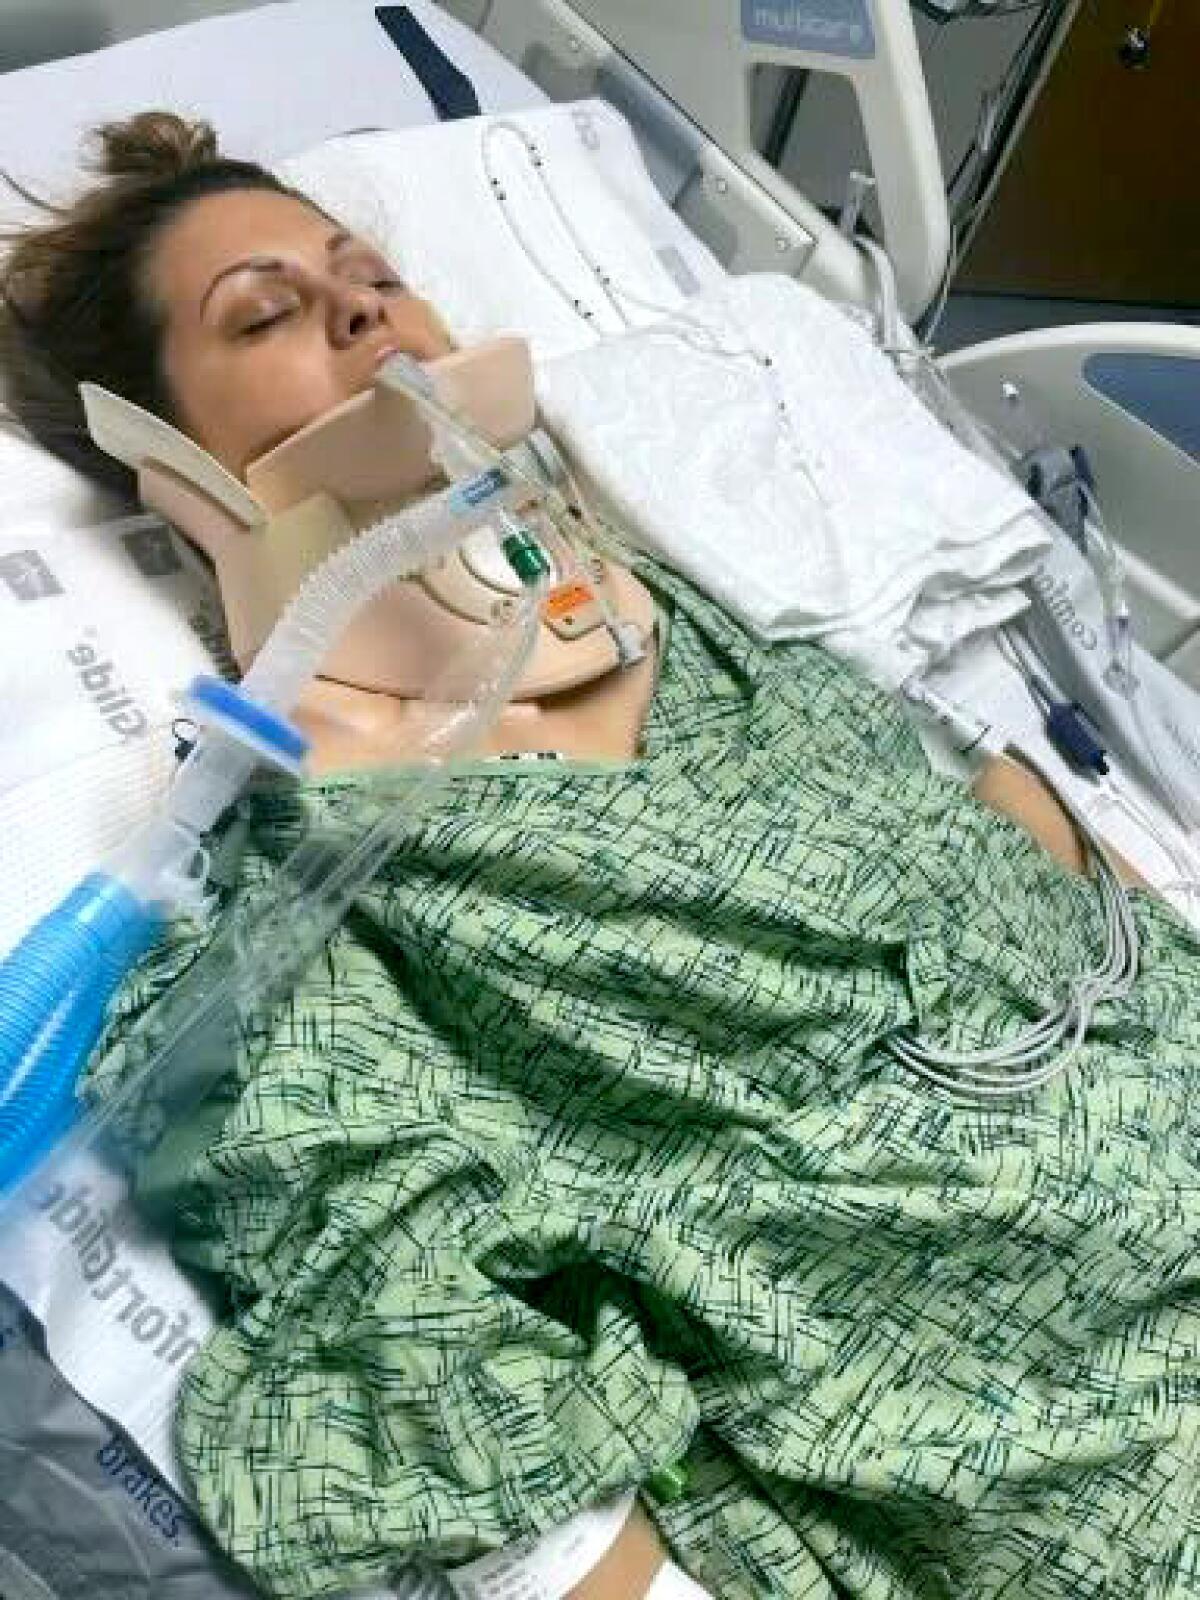 An intubated woman comatose on a hospital bed